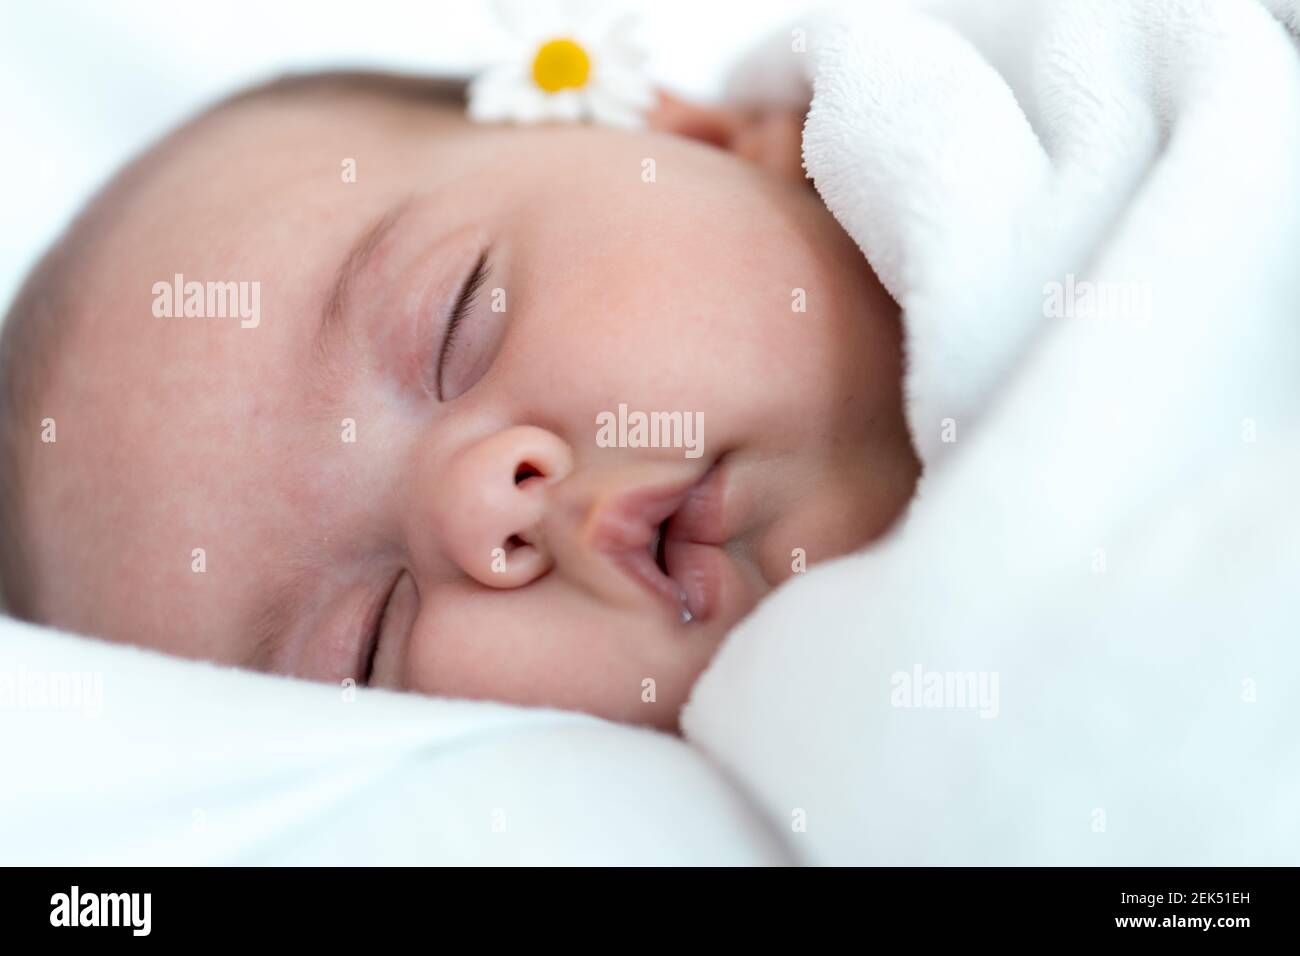 Newborn baby close-up. Side view of a chubby plump infant baby sleeping soundly on his back with chamomile behind the ear on a white background Stock Photo